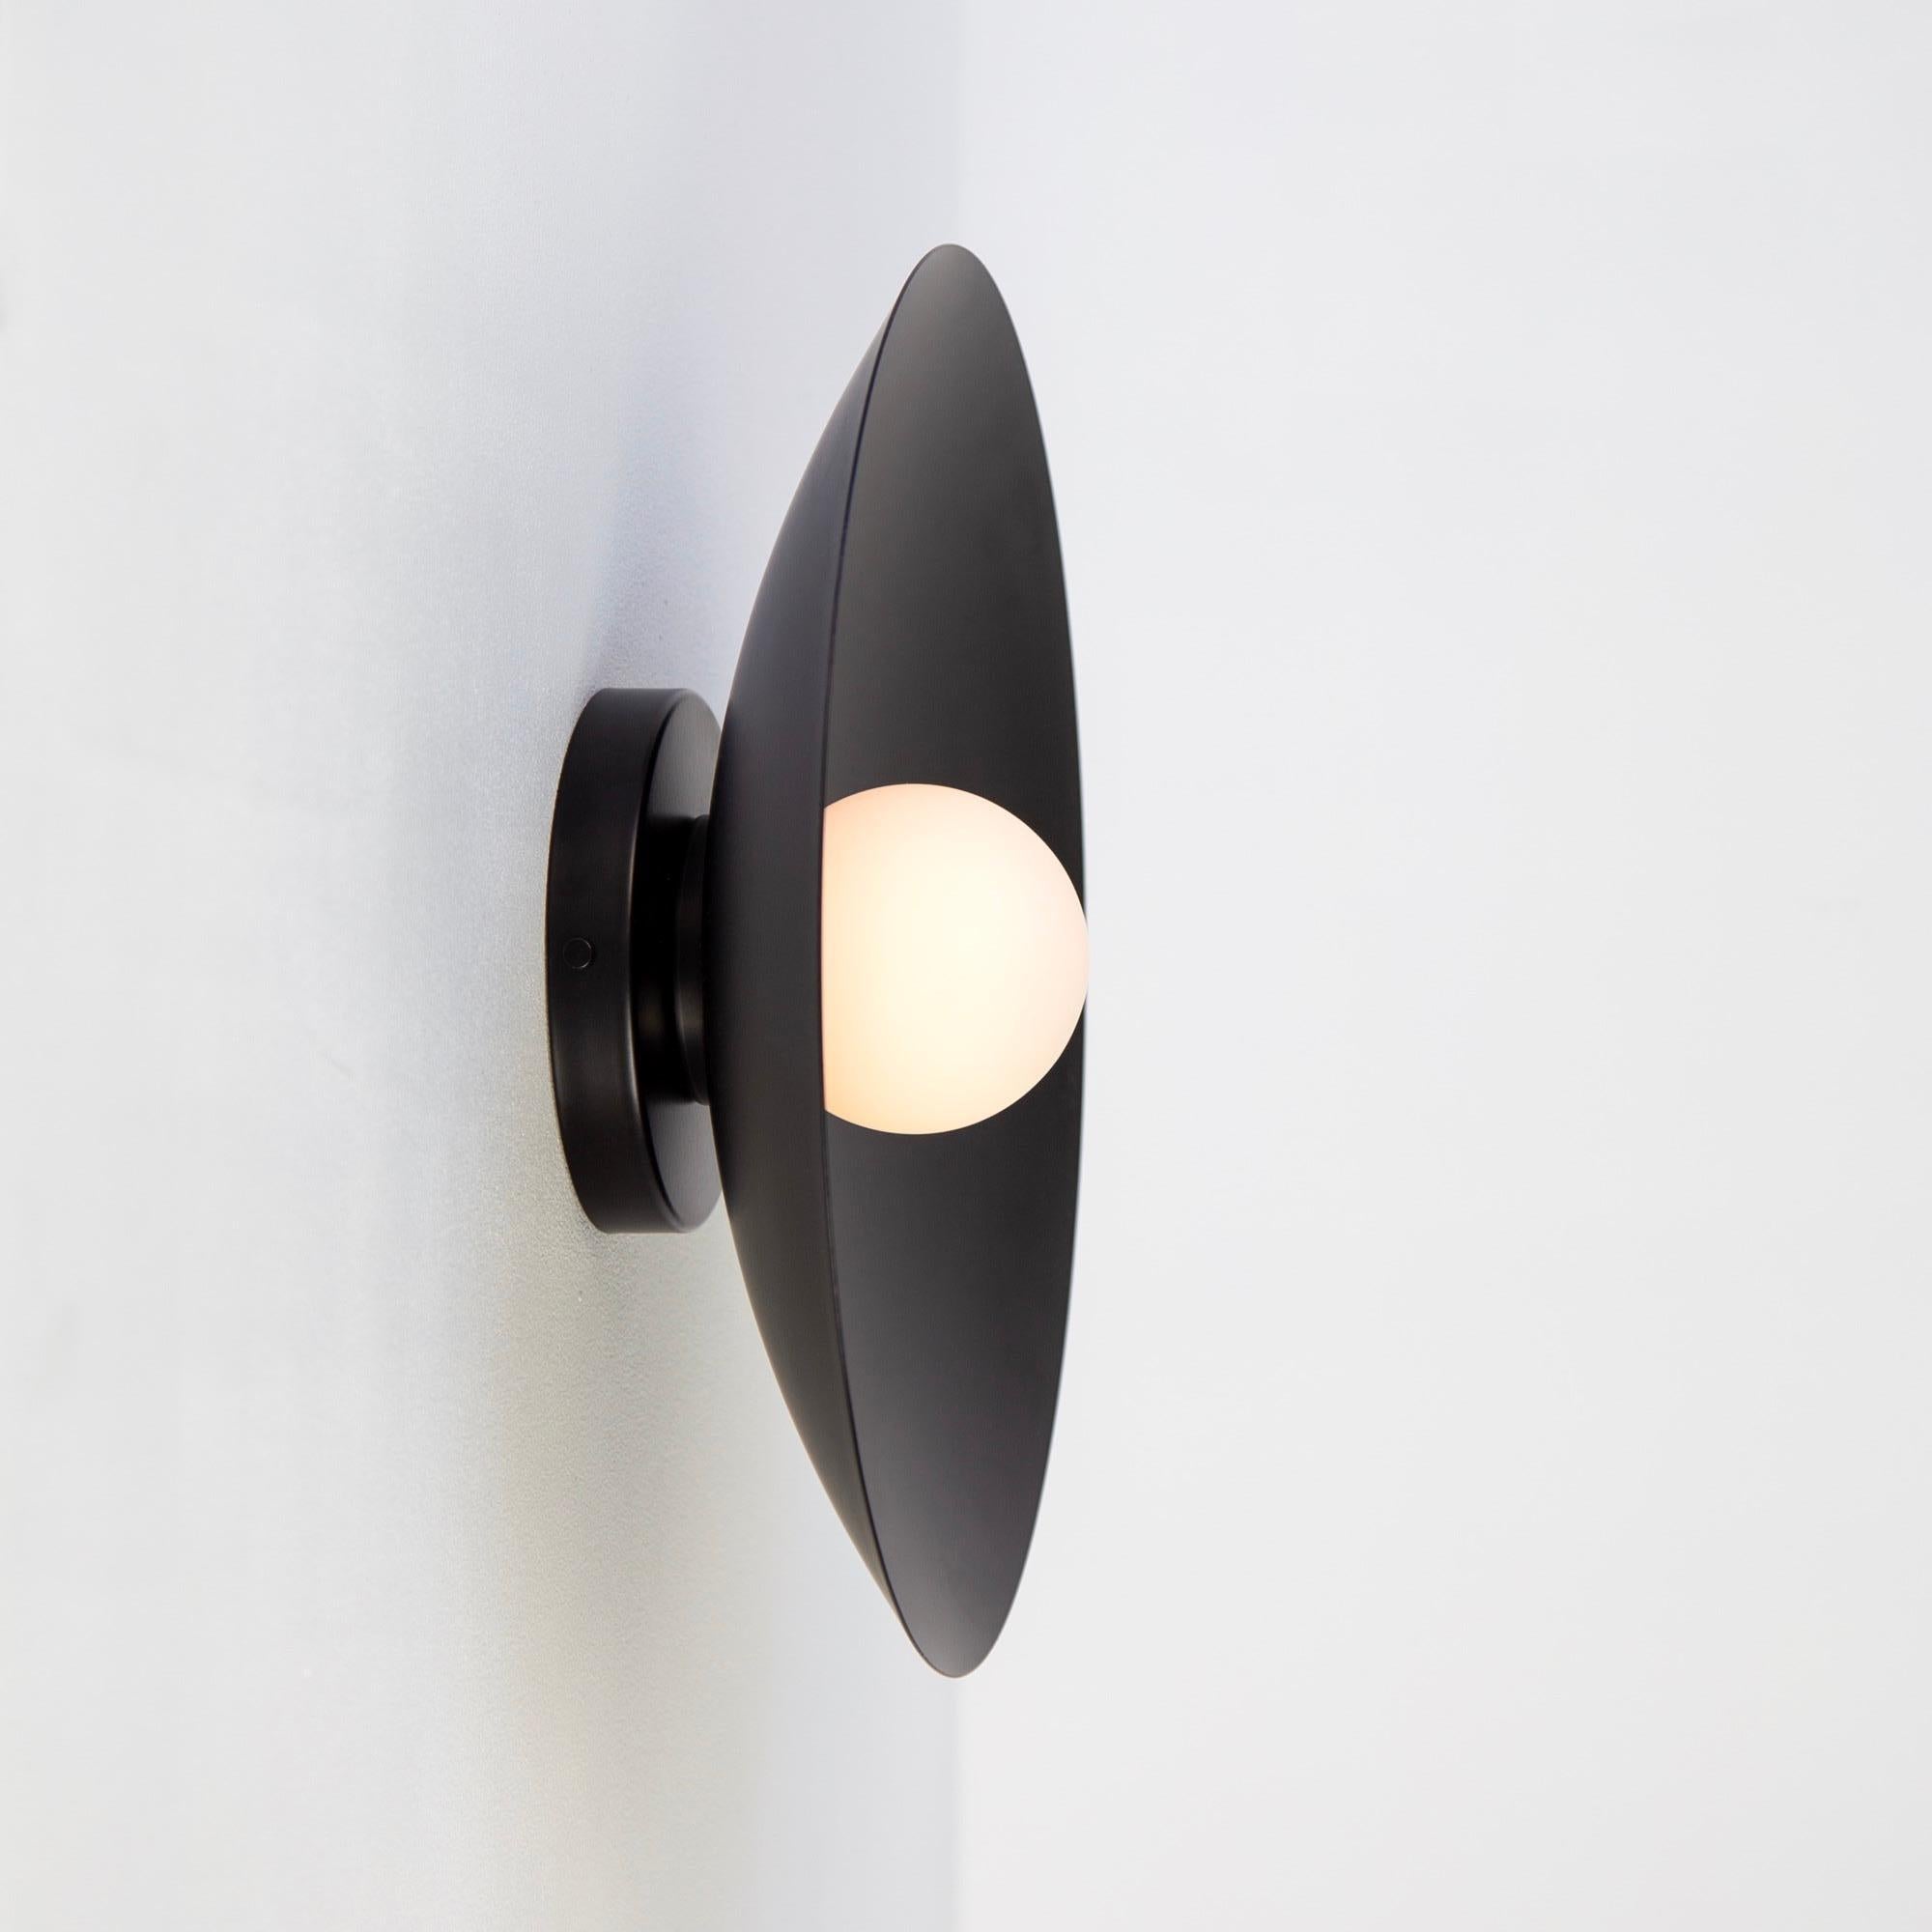 This listing is for 1x Dome Sconce in Black designed and manufactured by Research.Lighting.

Materials: Steel, Brass & Glass
Finish: Powder Coated Steel in black
Electronics: 1x G9 Socket, 4.5 Watt LED Bulb (included), 450 Lumens
UL Listed. Made in